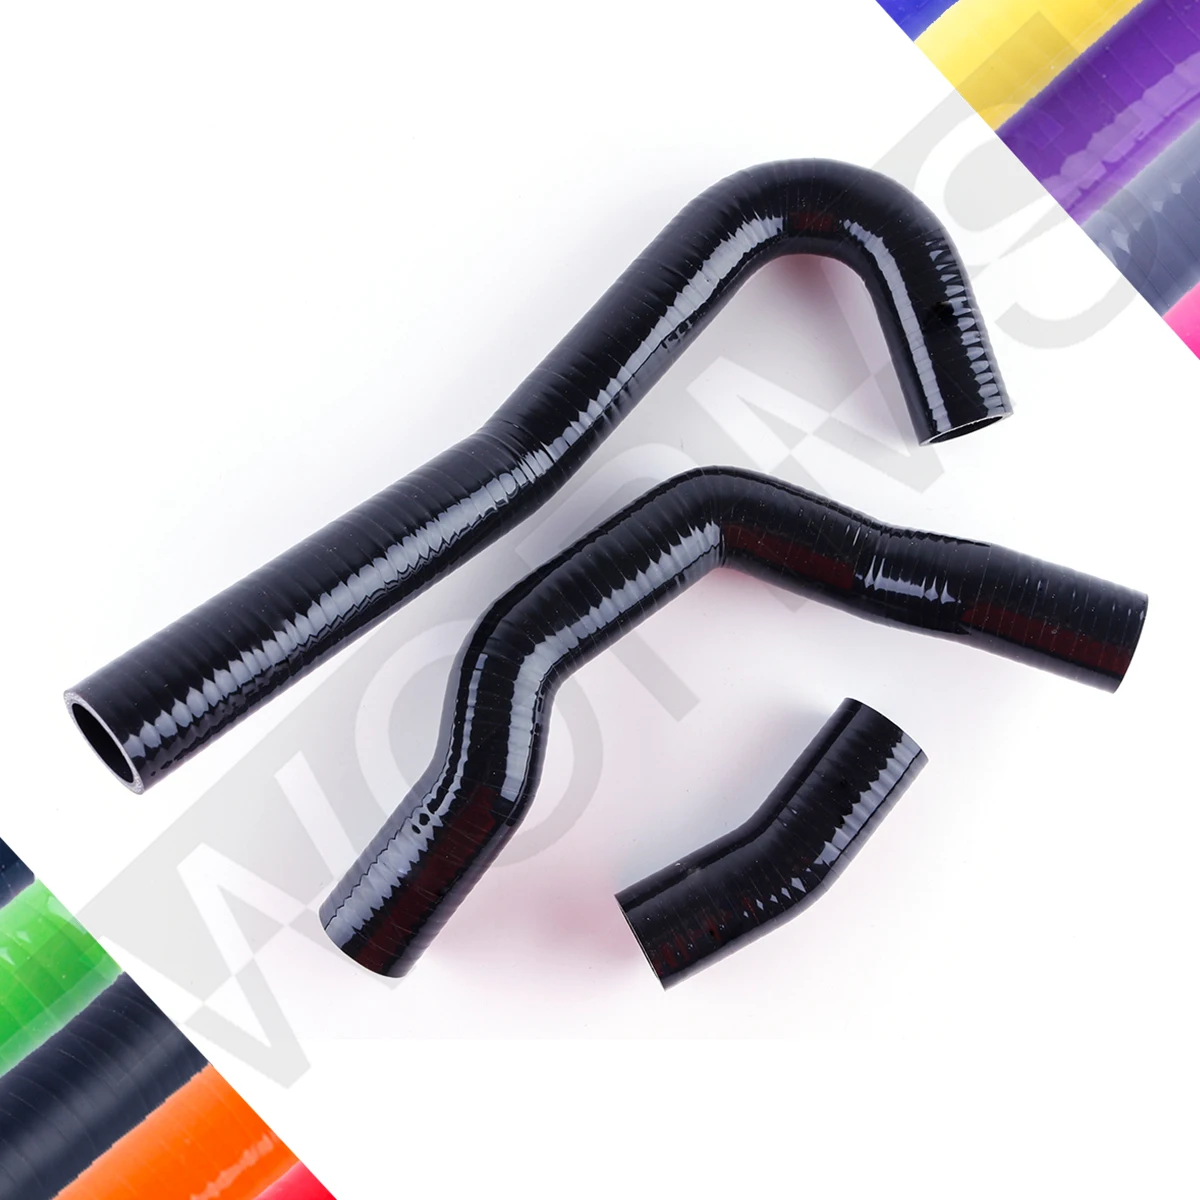 

For Nissan Silvia 180SX 200SX S13 CA18DET 1989-1994 1990 1991 1992 1993 Silicone Radiator Hose Pipe Kit